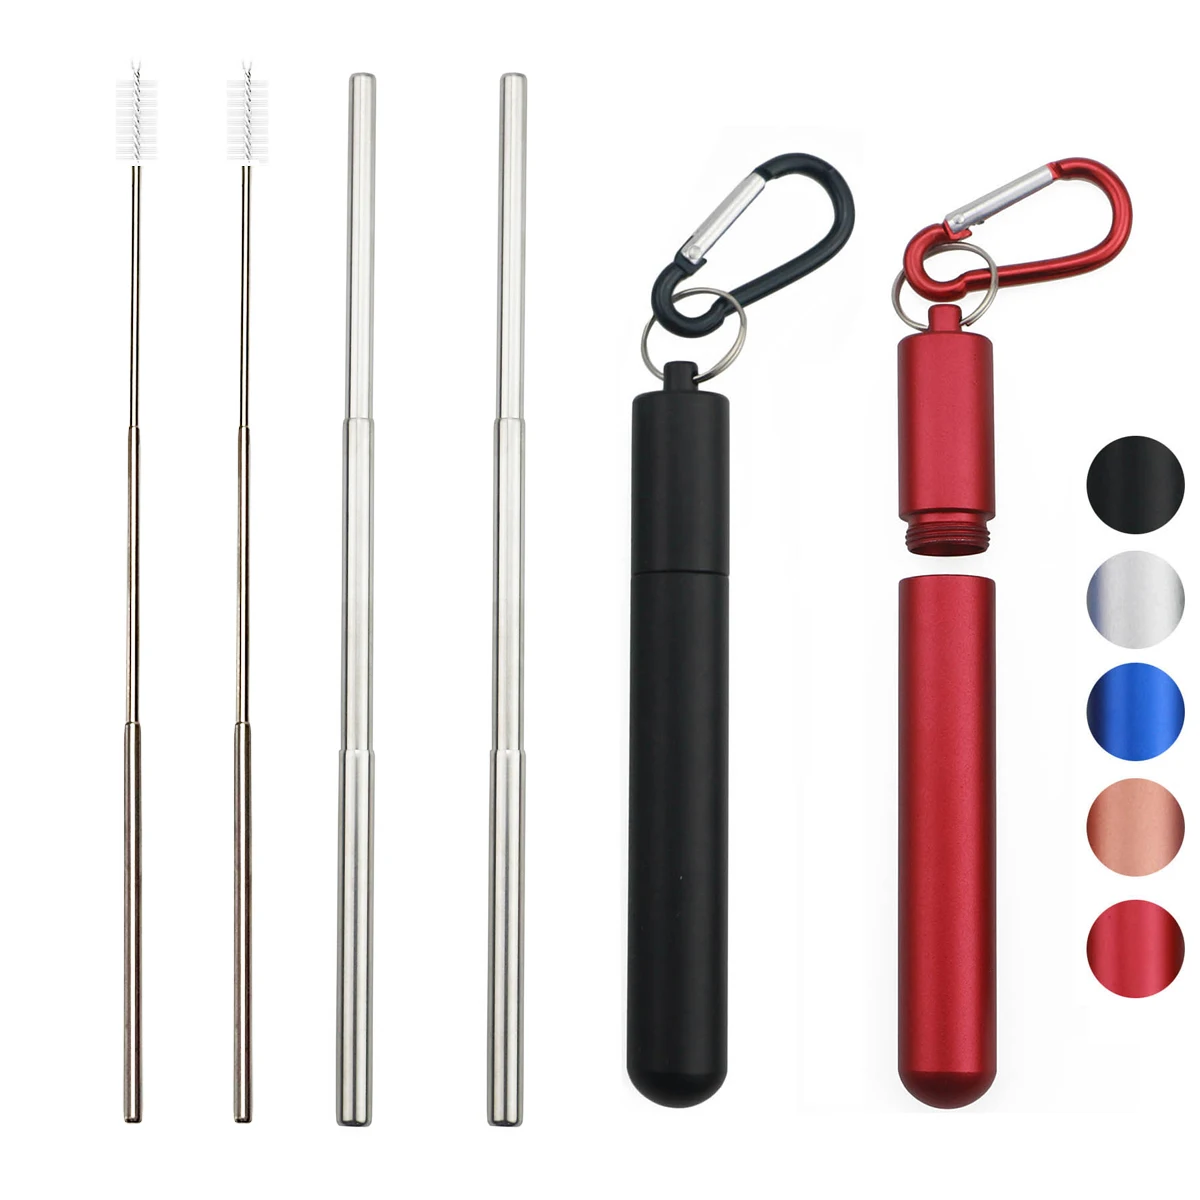 

Collapsible Telescopic Metal Straw 304 Stainless Steel Drinking Straw Portable Travel Camping Reusable Straw with Cleaner Brush